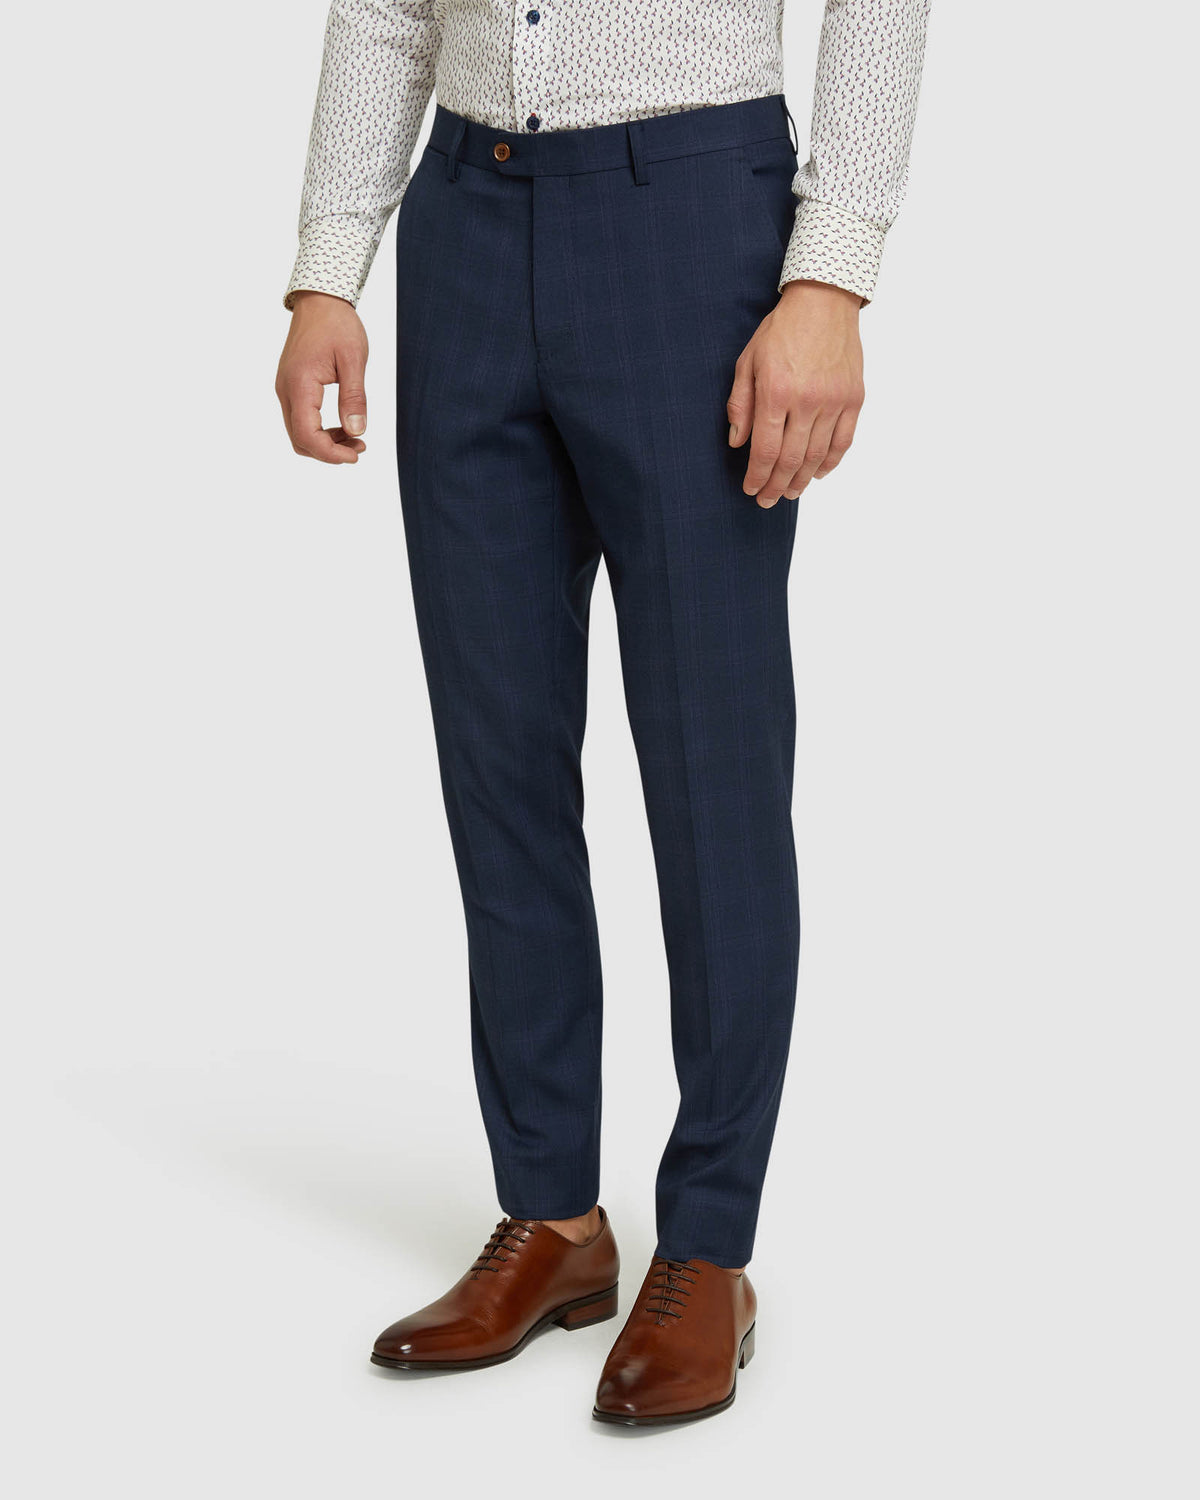 BYRON ECO CHECKED SUIT TROUSERS NAVY CHECK